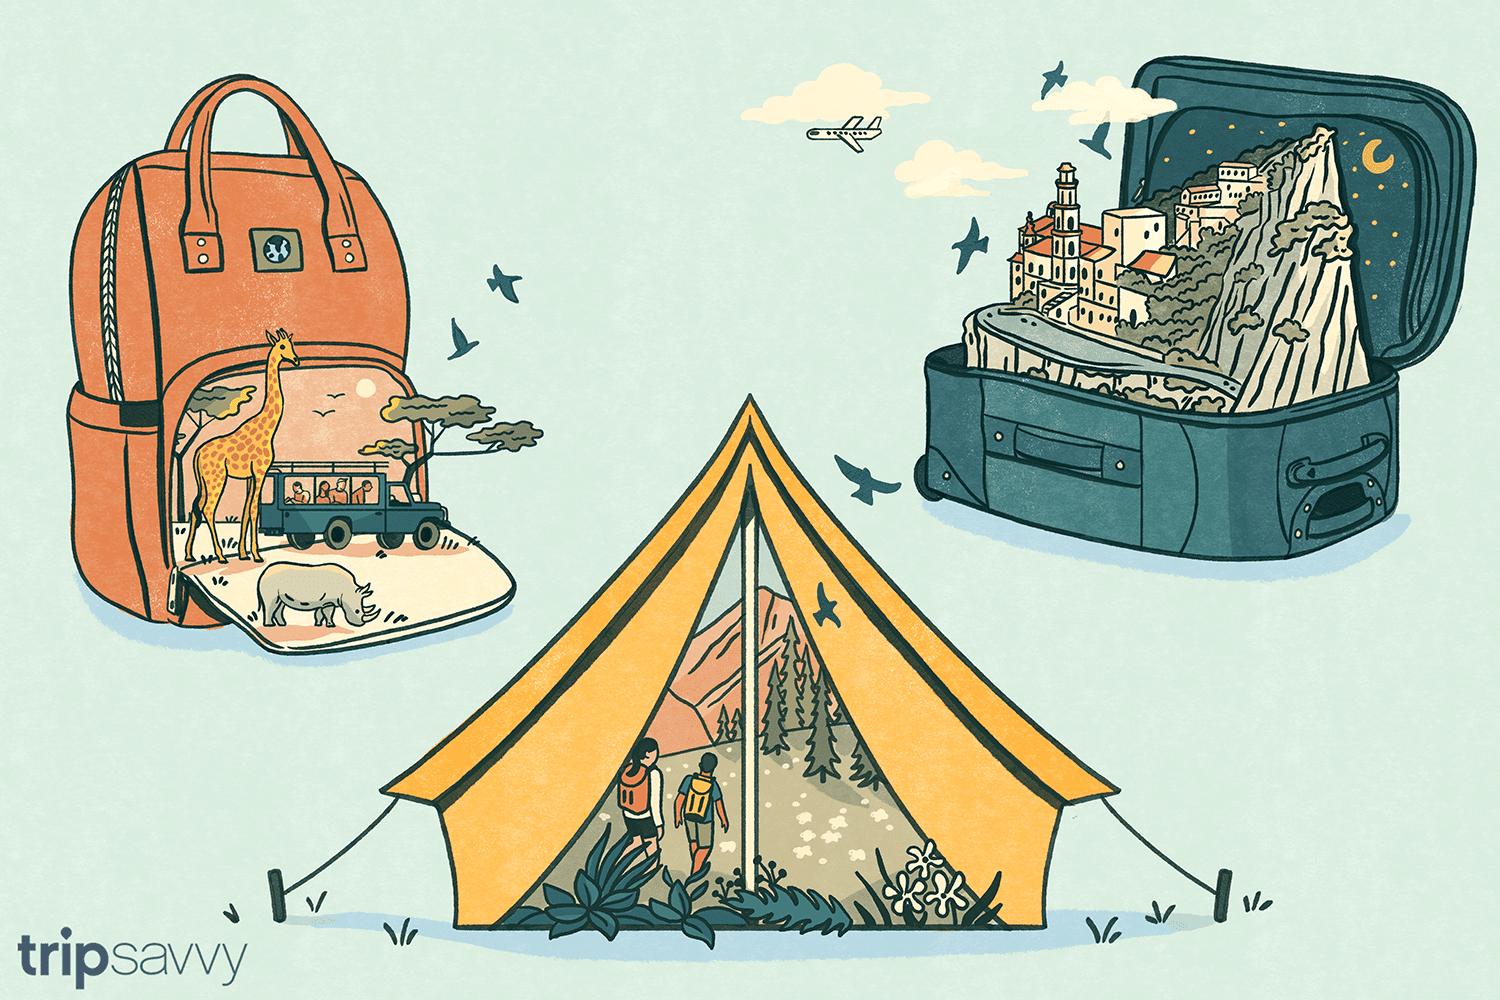 Illustration of 3 different scenes coming out of travel gear (suitcase, tent, backpack)